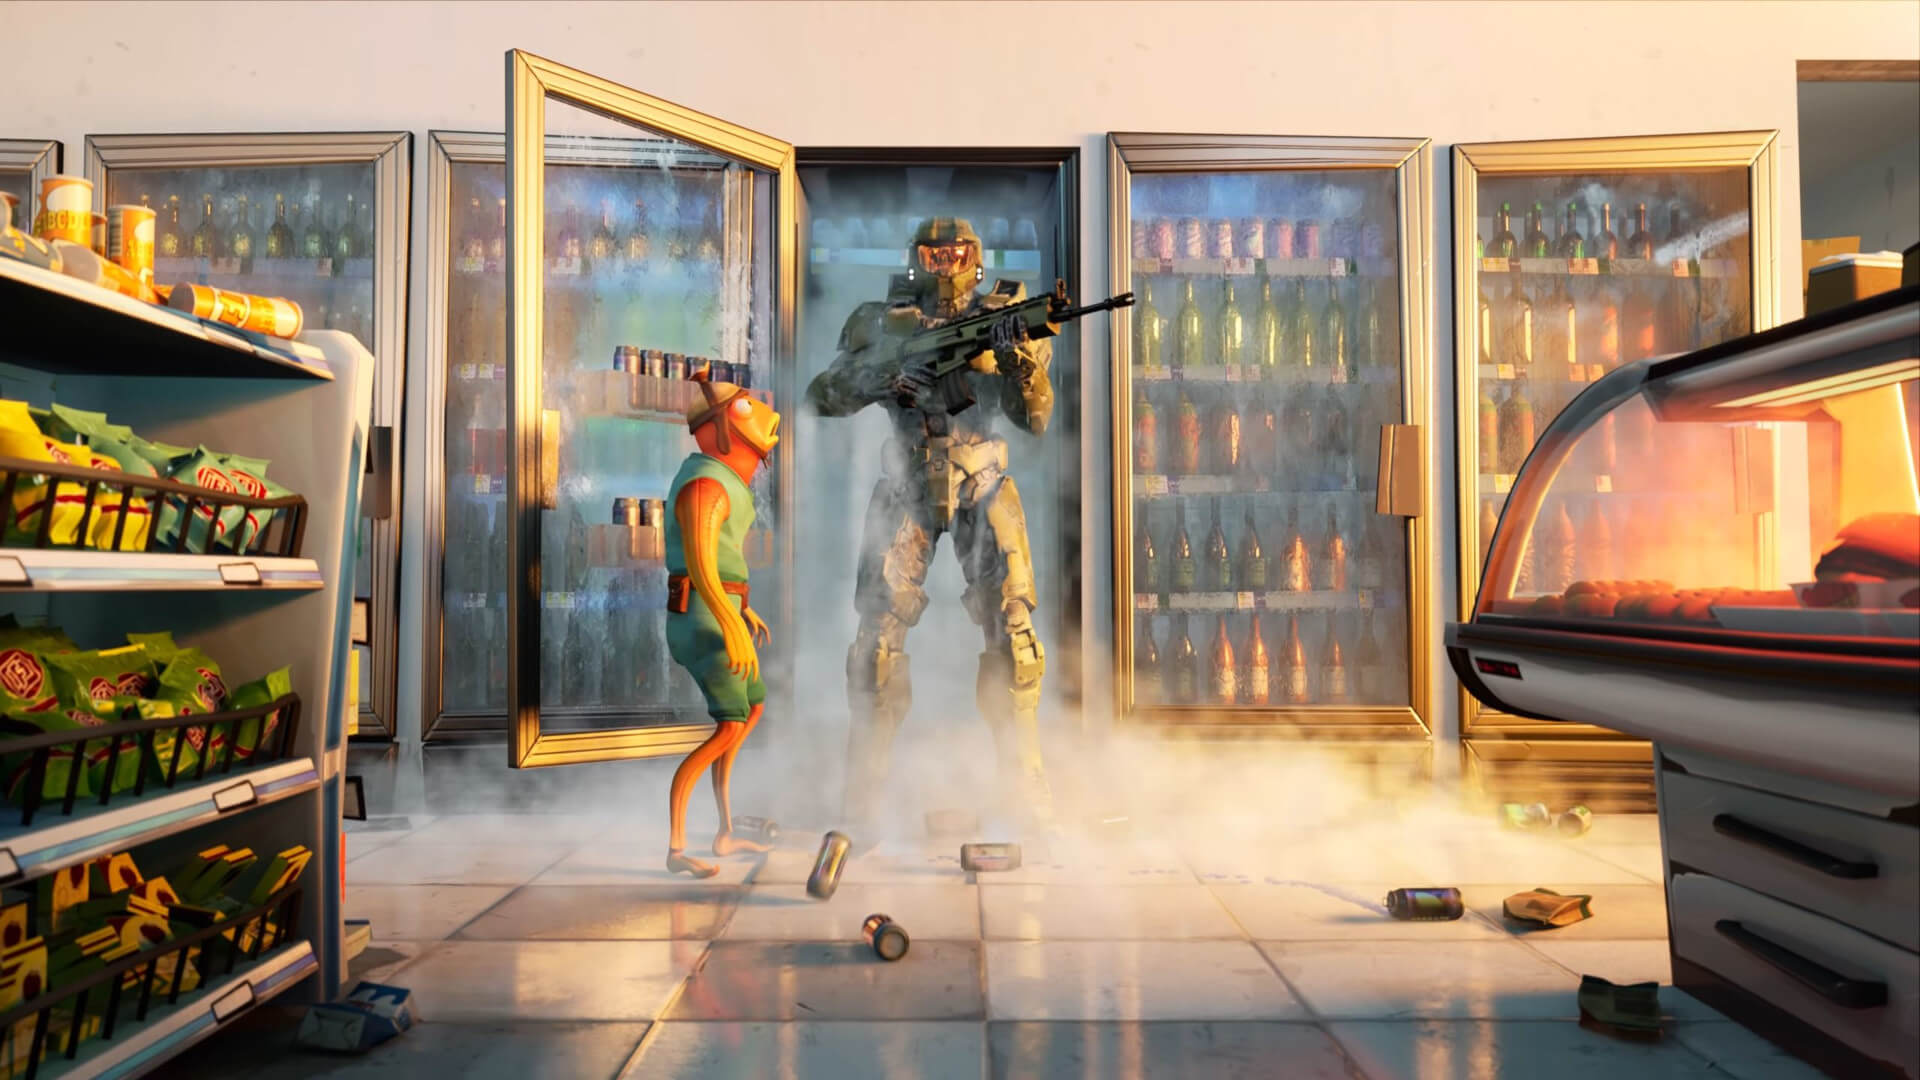 Master Chief emerging from a fridge in the Fortnite Halo crossover, which isn't the Fortnite Dragon Ball crossover but is still a cool crossover